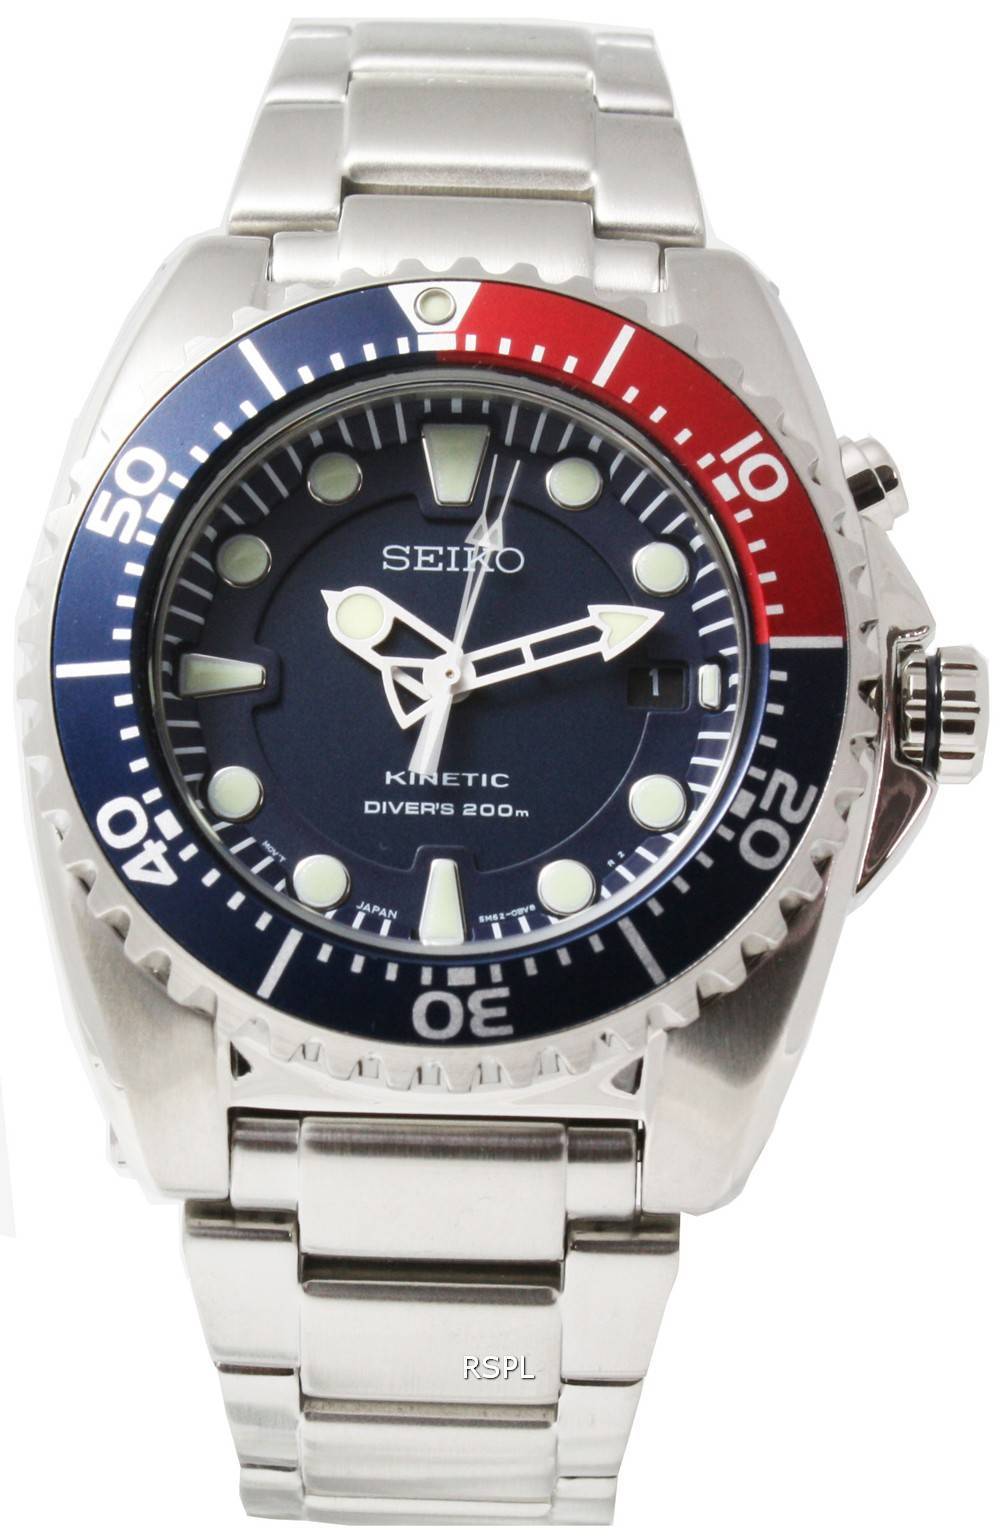 Seiko Kinetic Divers SKA369P1 - CityWatches.co.nz